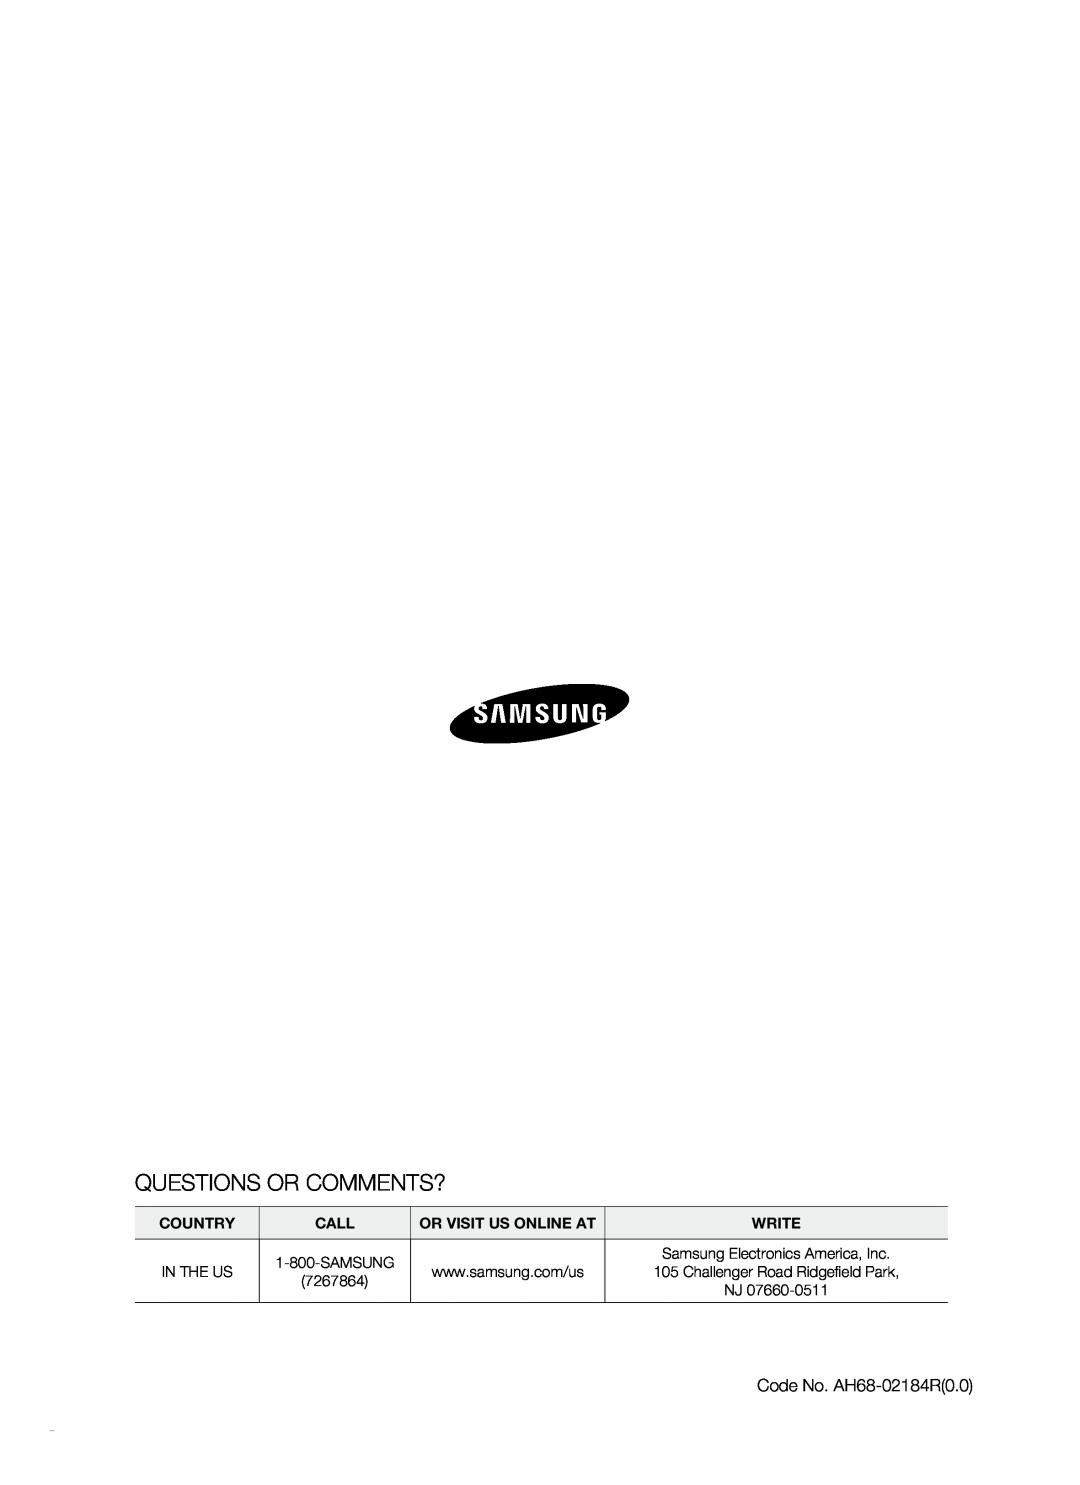 Samsung HT-SB1R, HT-WS1R, HT-SB1G Questions Or Comments?, Country, Call, Or Visit Us Online At, Write, In The Us, 7267864 